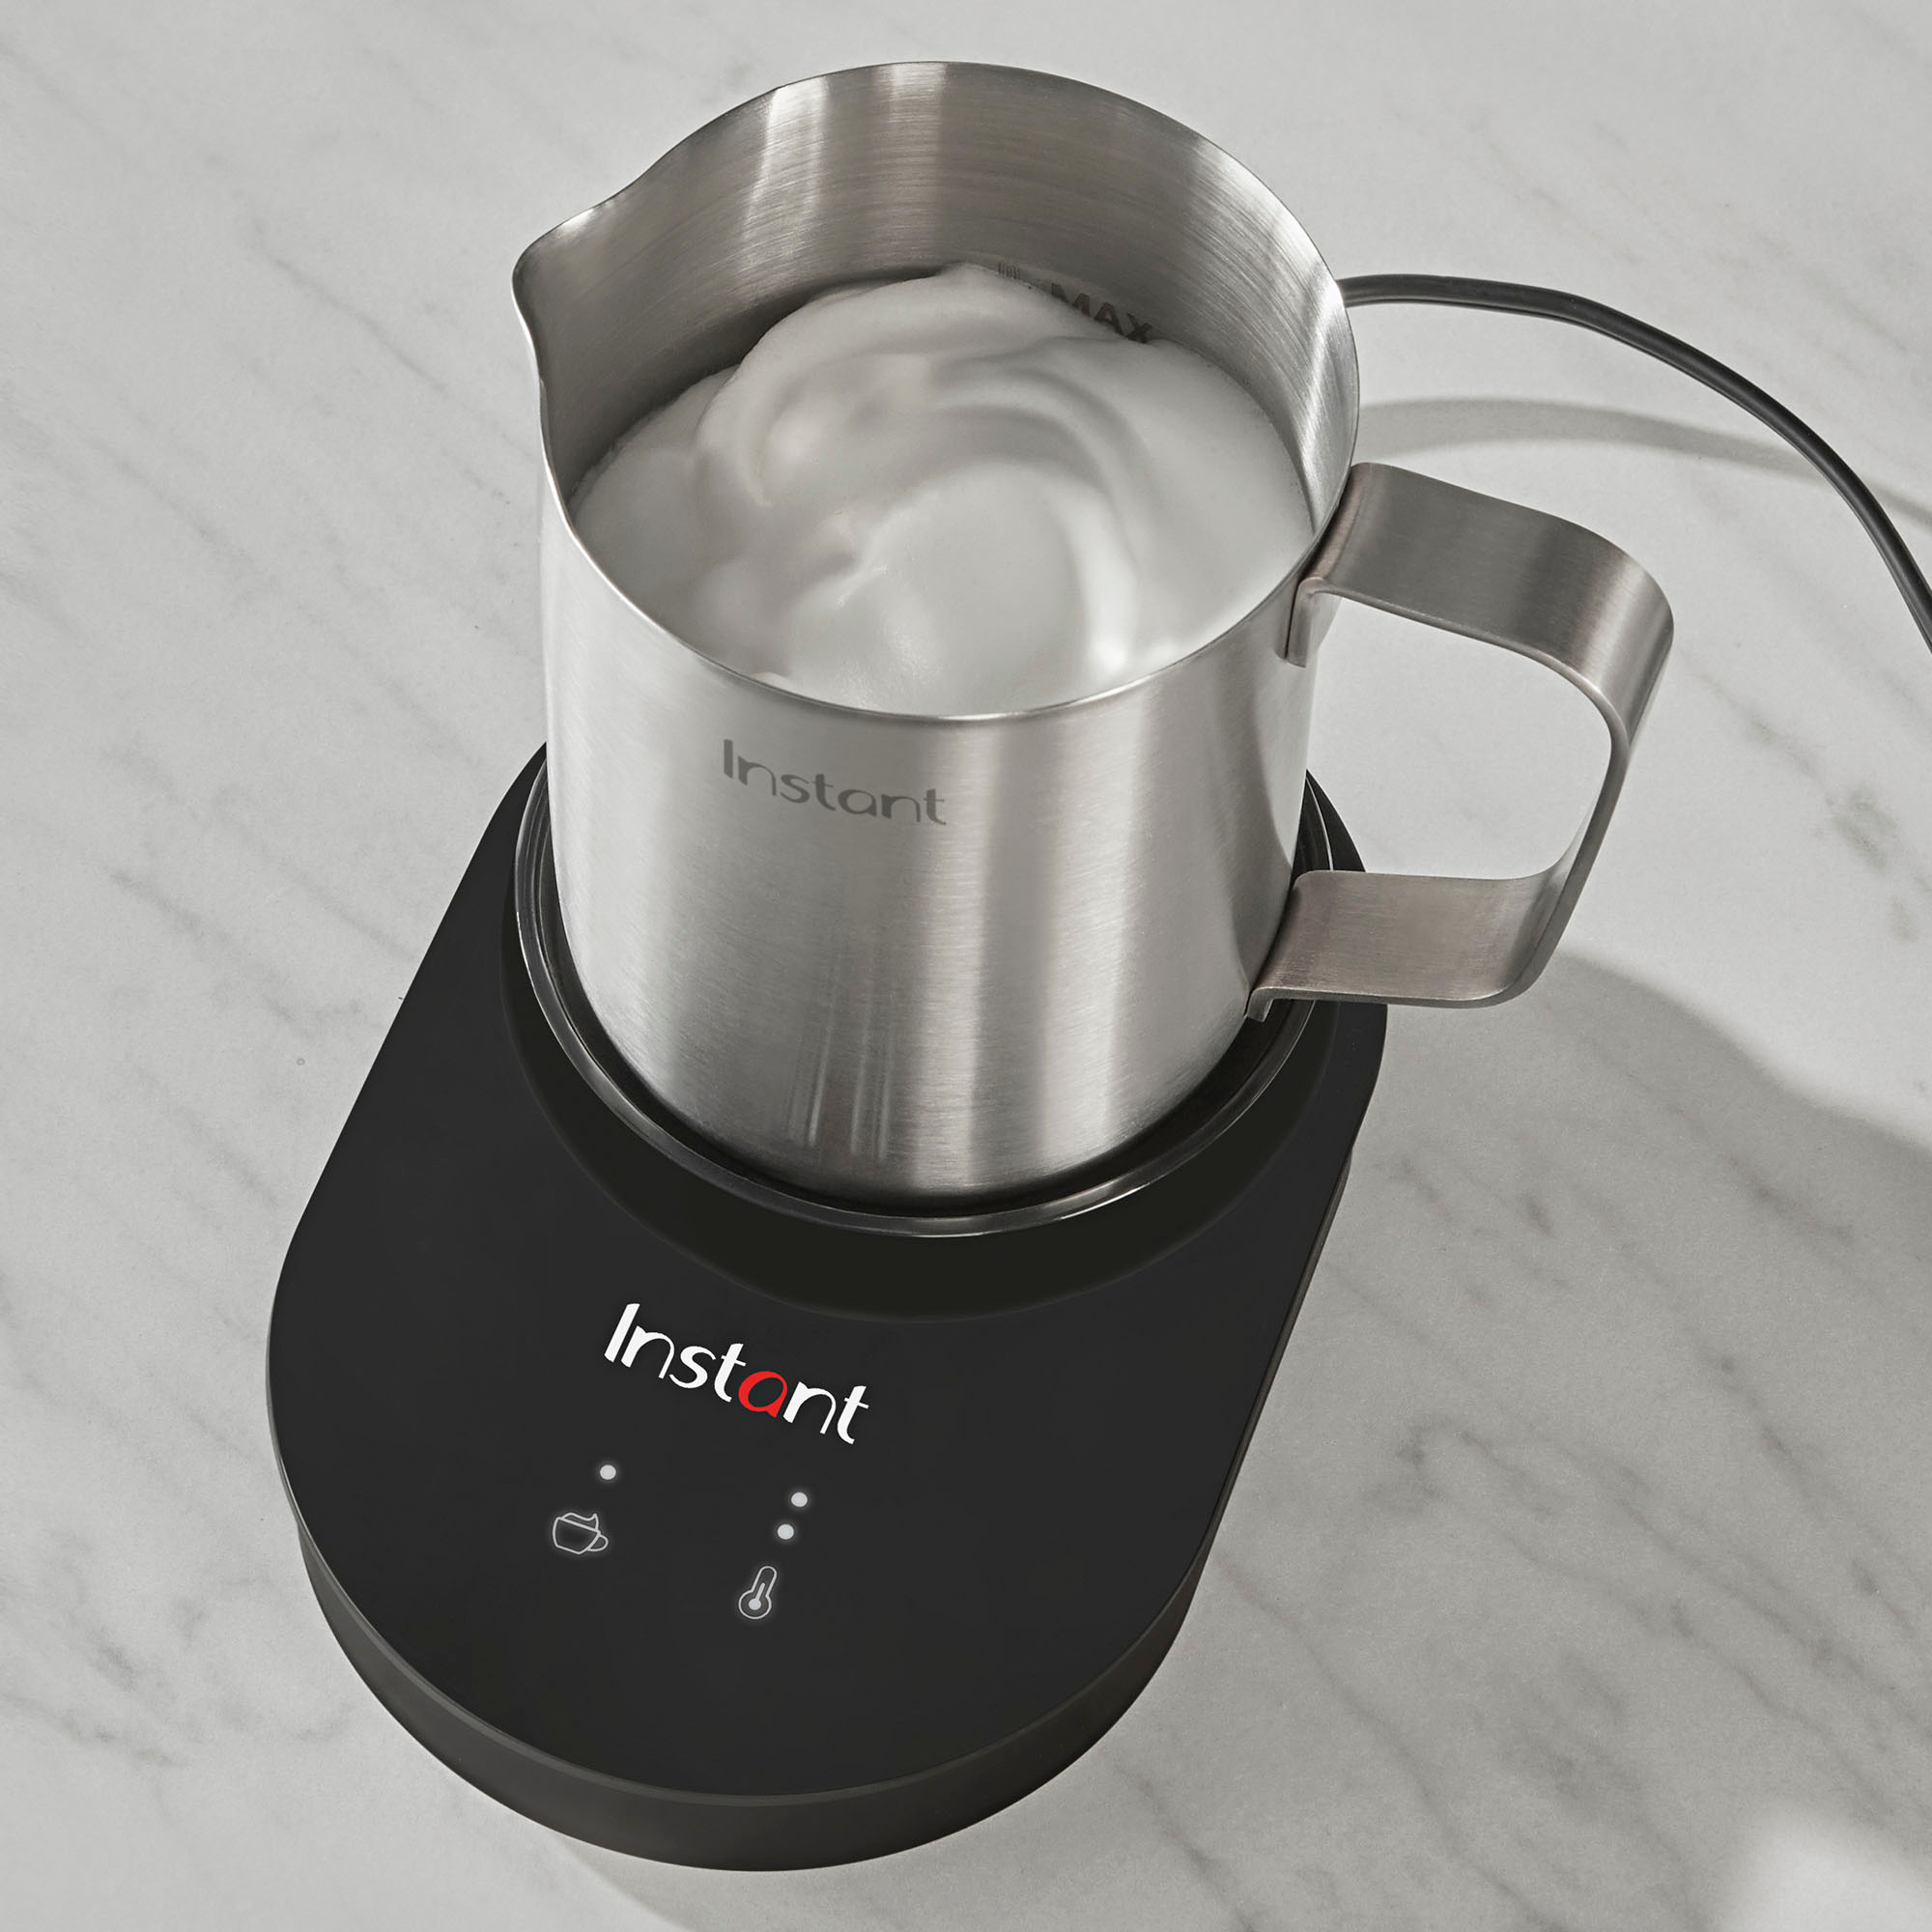 milk in instant pot frother - Adventures of a Nurse